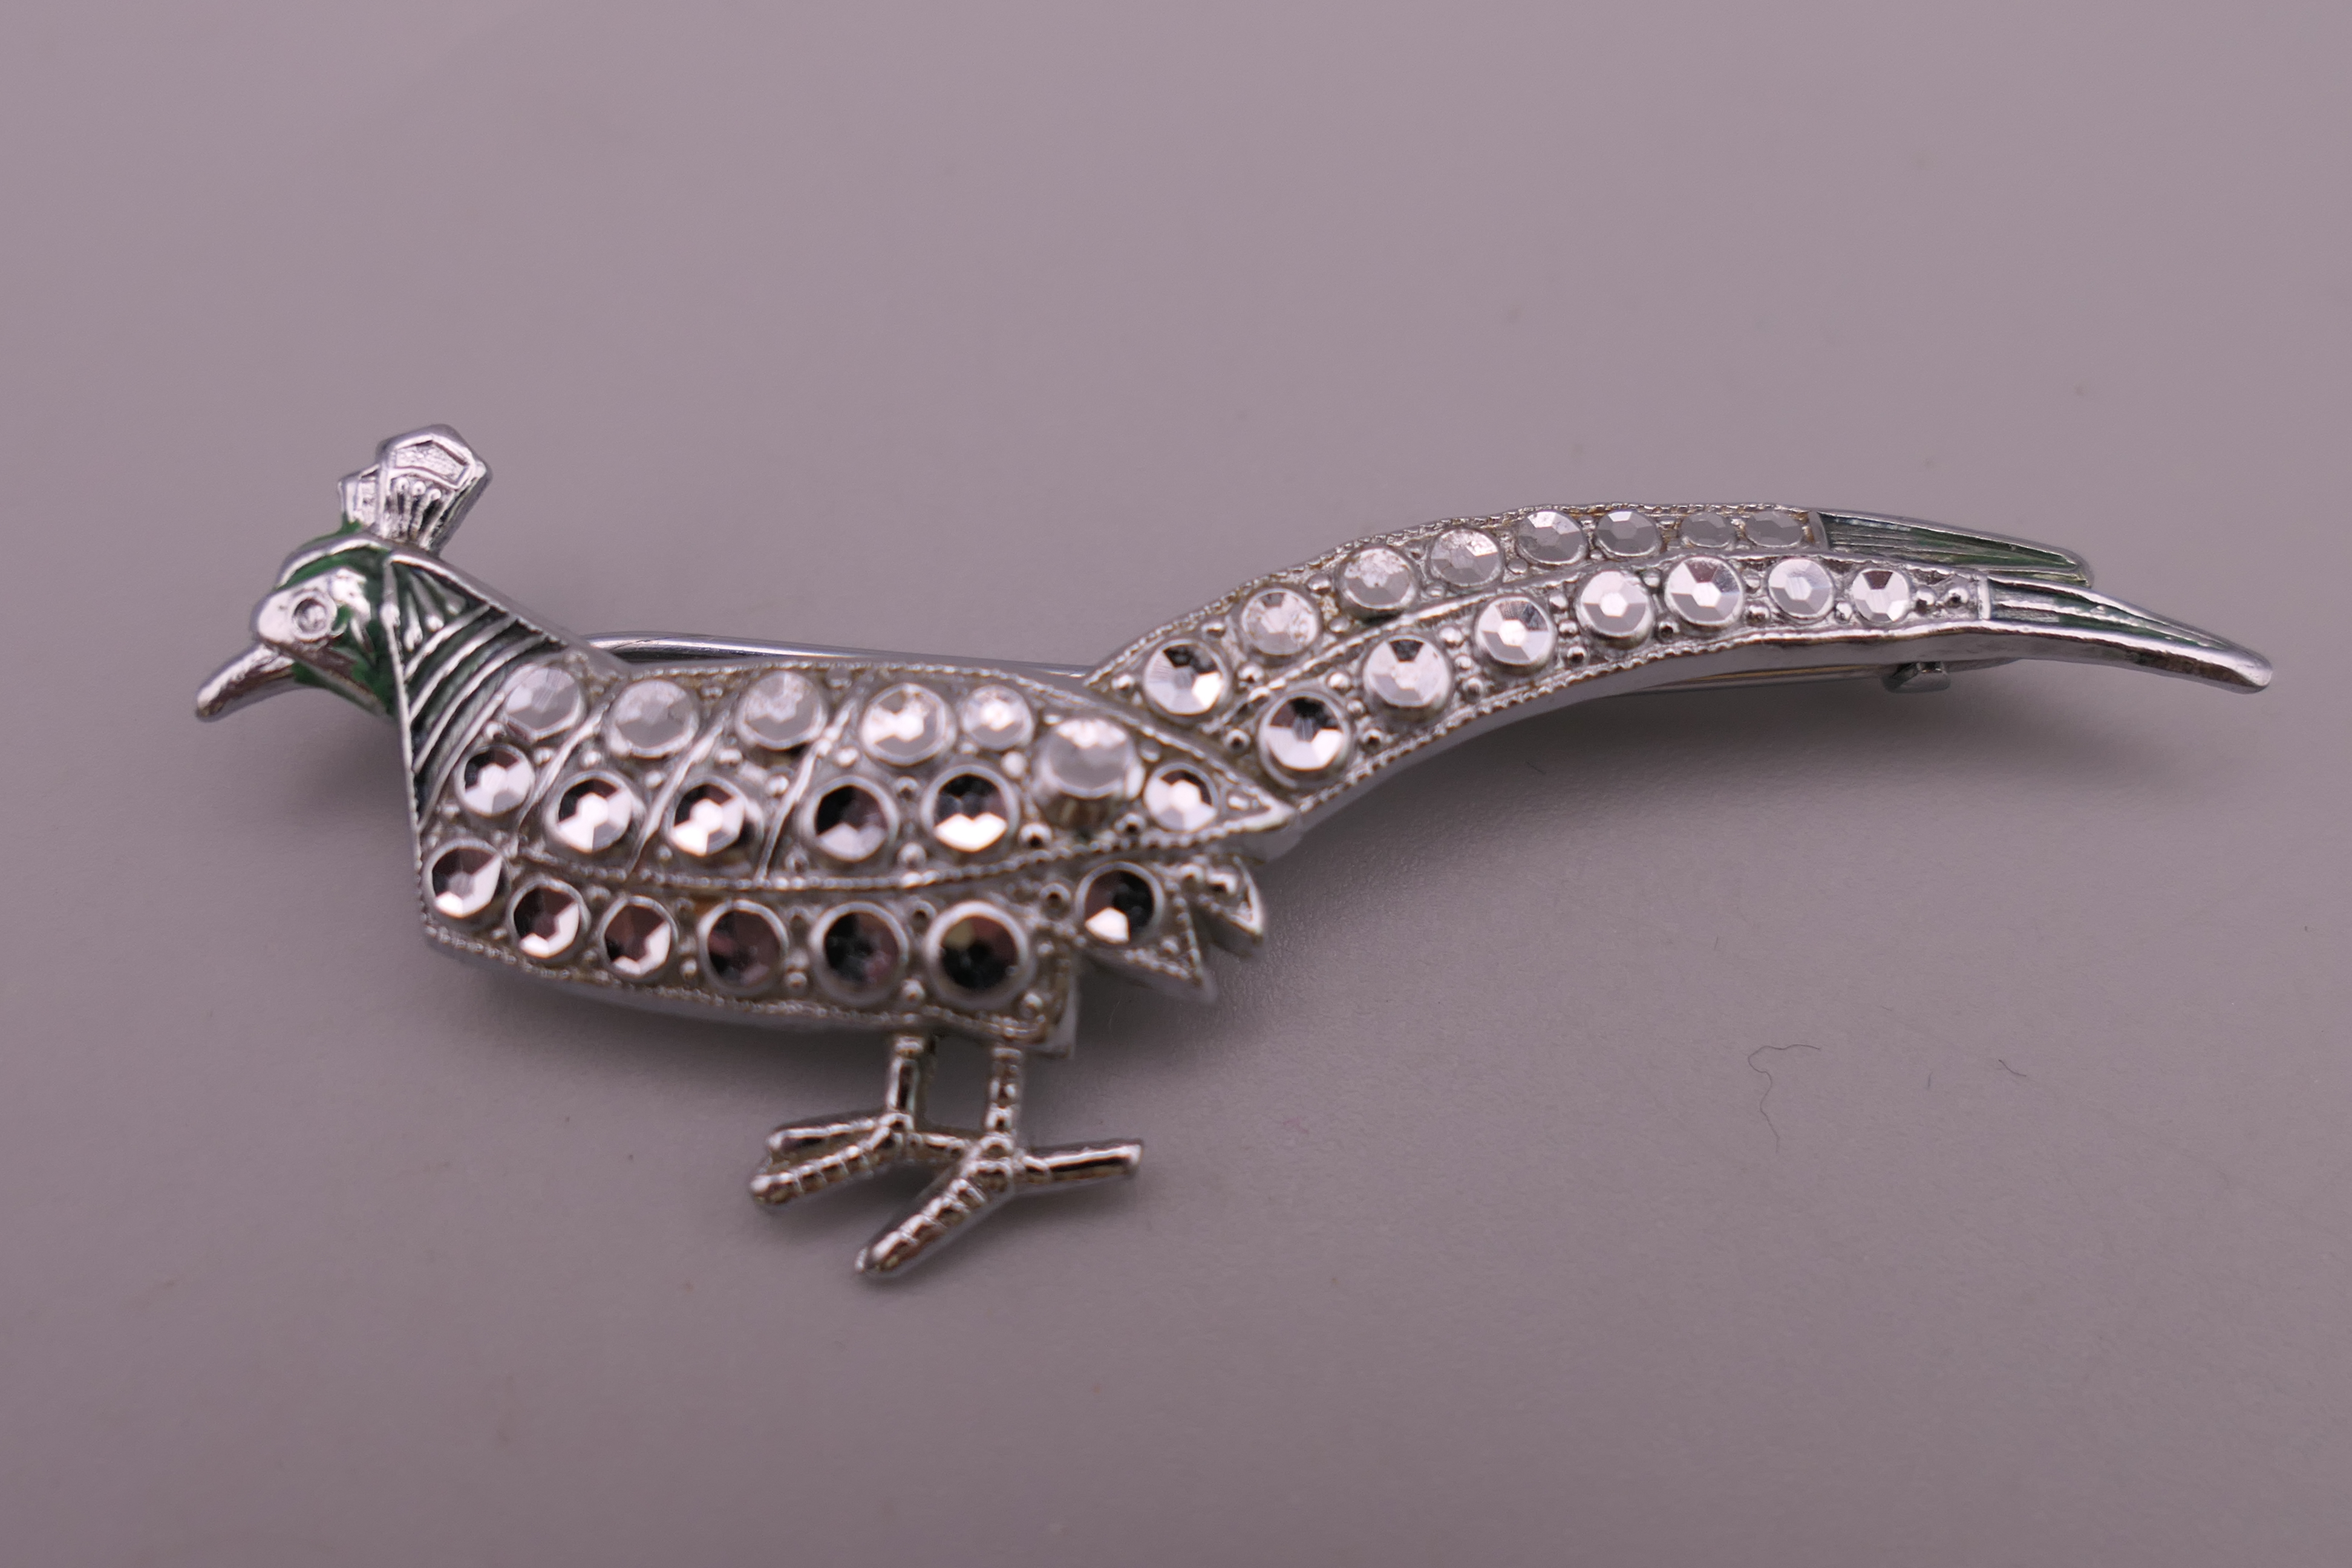 A small quantity of vintage jewellery and a propelling pencil. Bird brooch 6 cm long. - Image 8 of 11